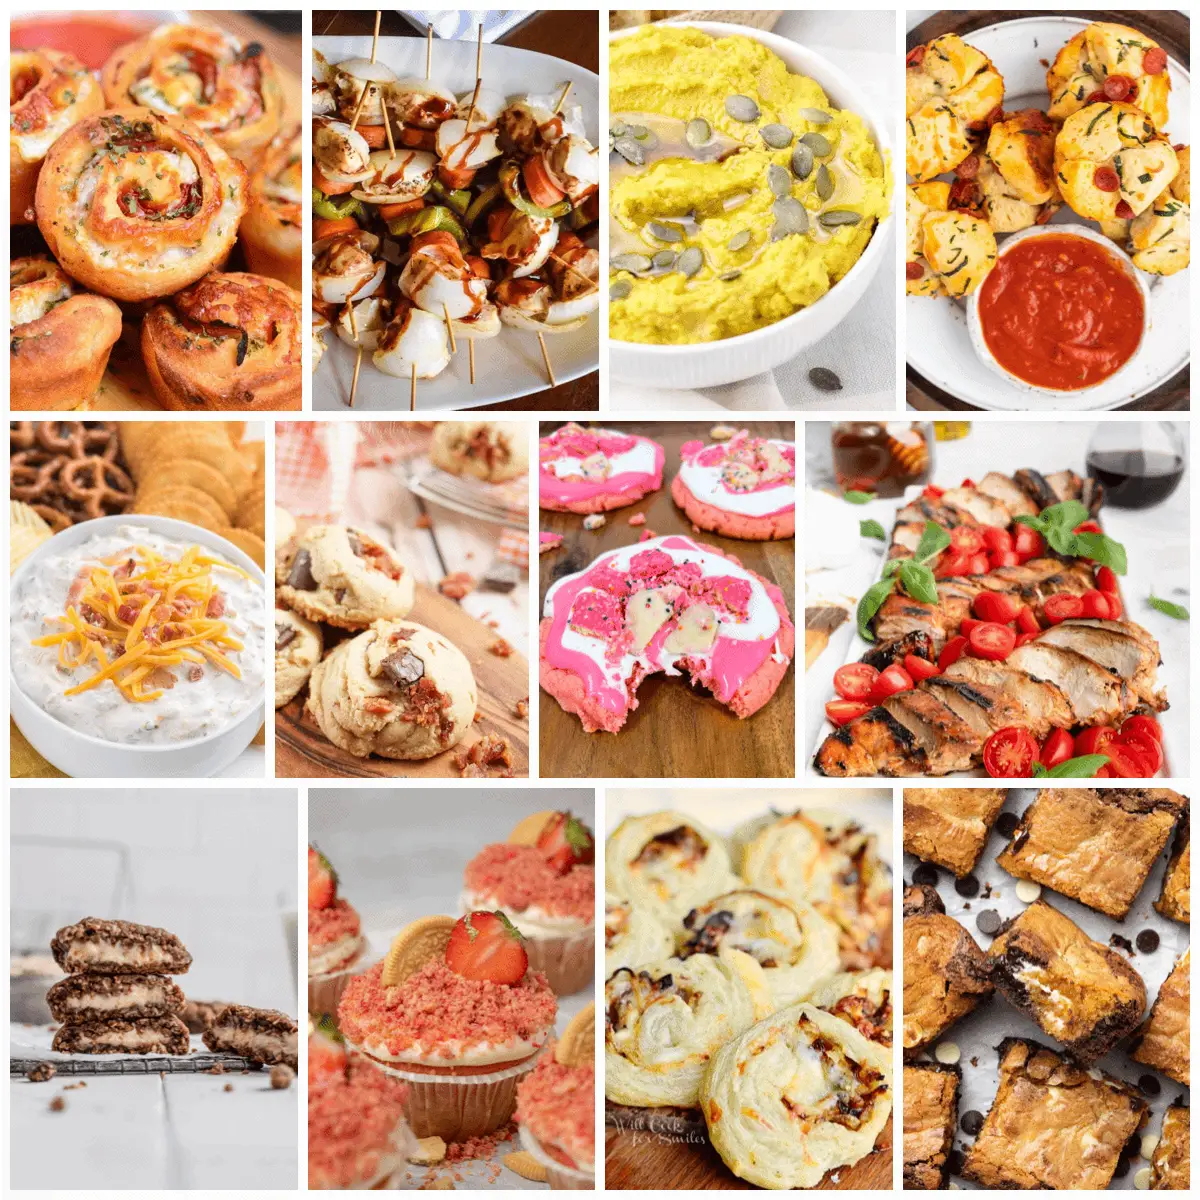 Easy Block party foods ideas appetizers, side dishes, desserts, meals, recipes